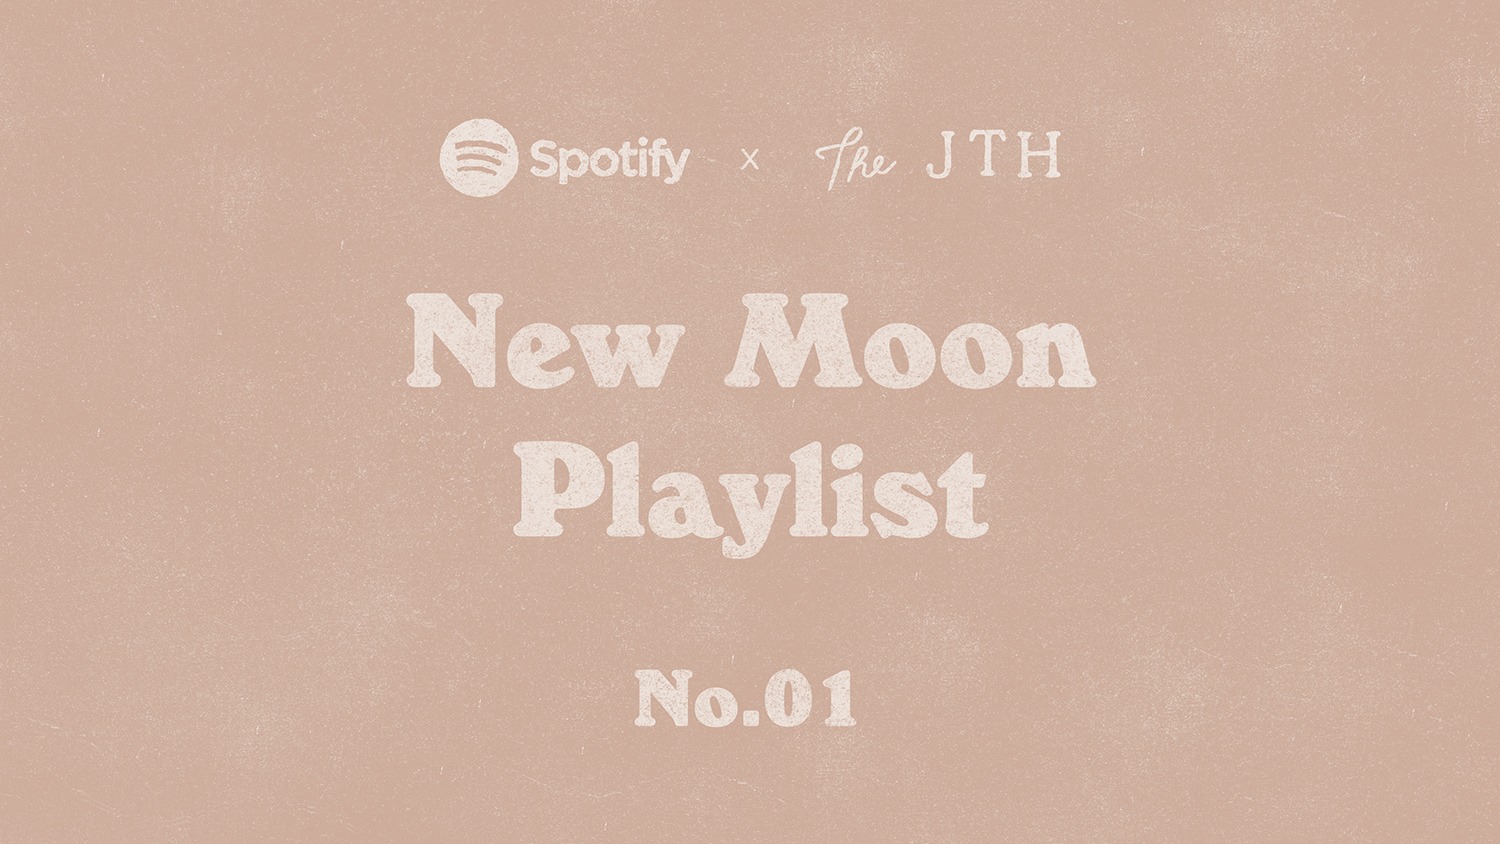 New Moon Playlist by The JTH on Spotify